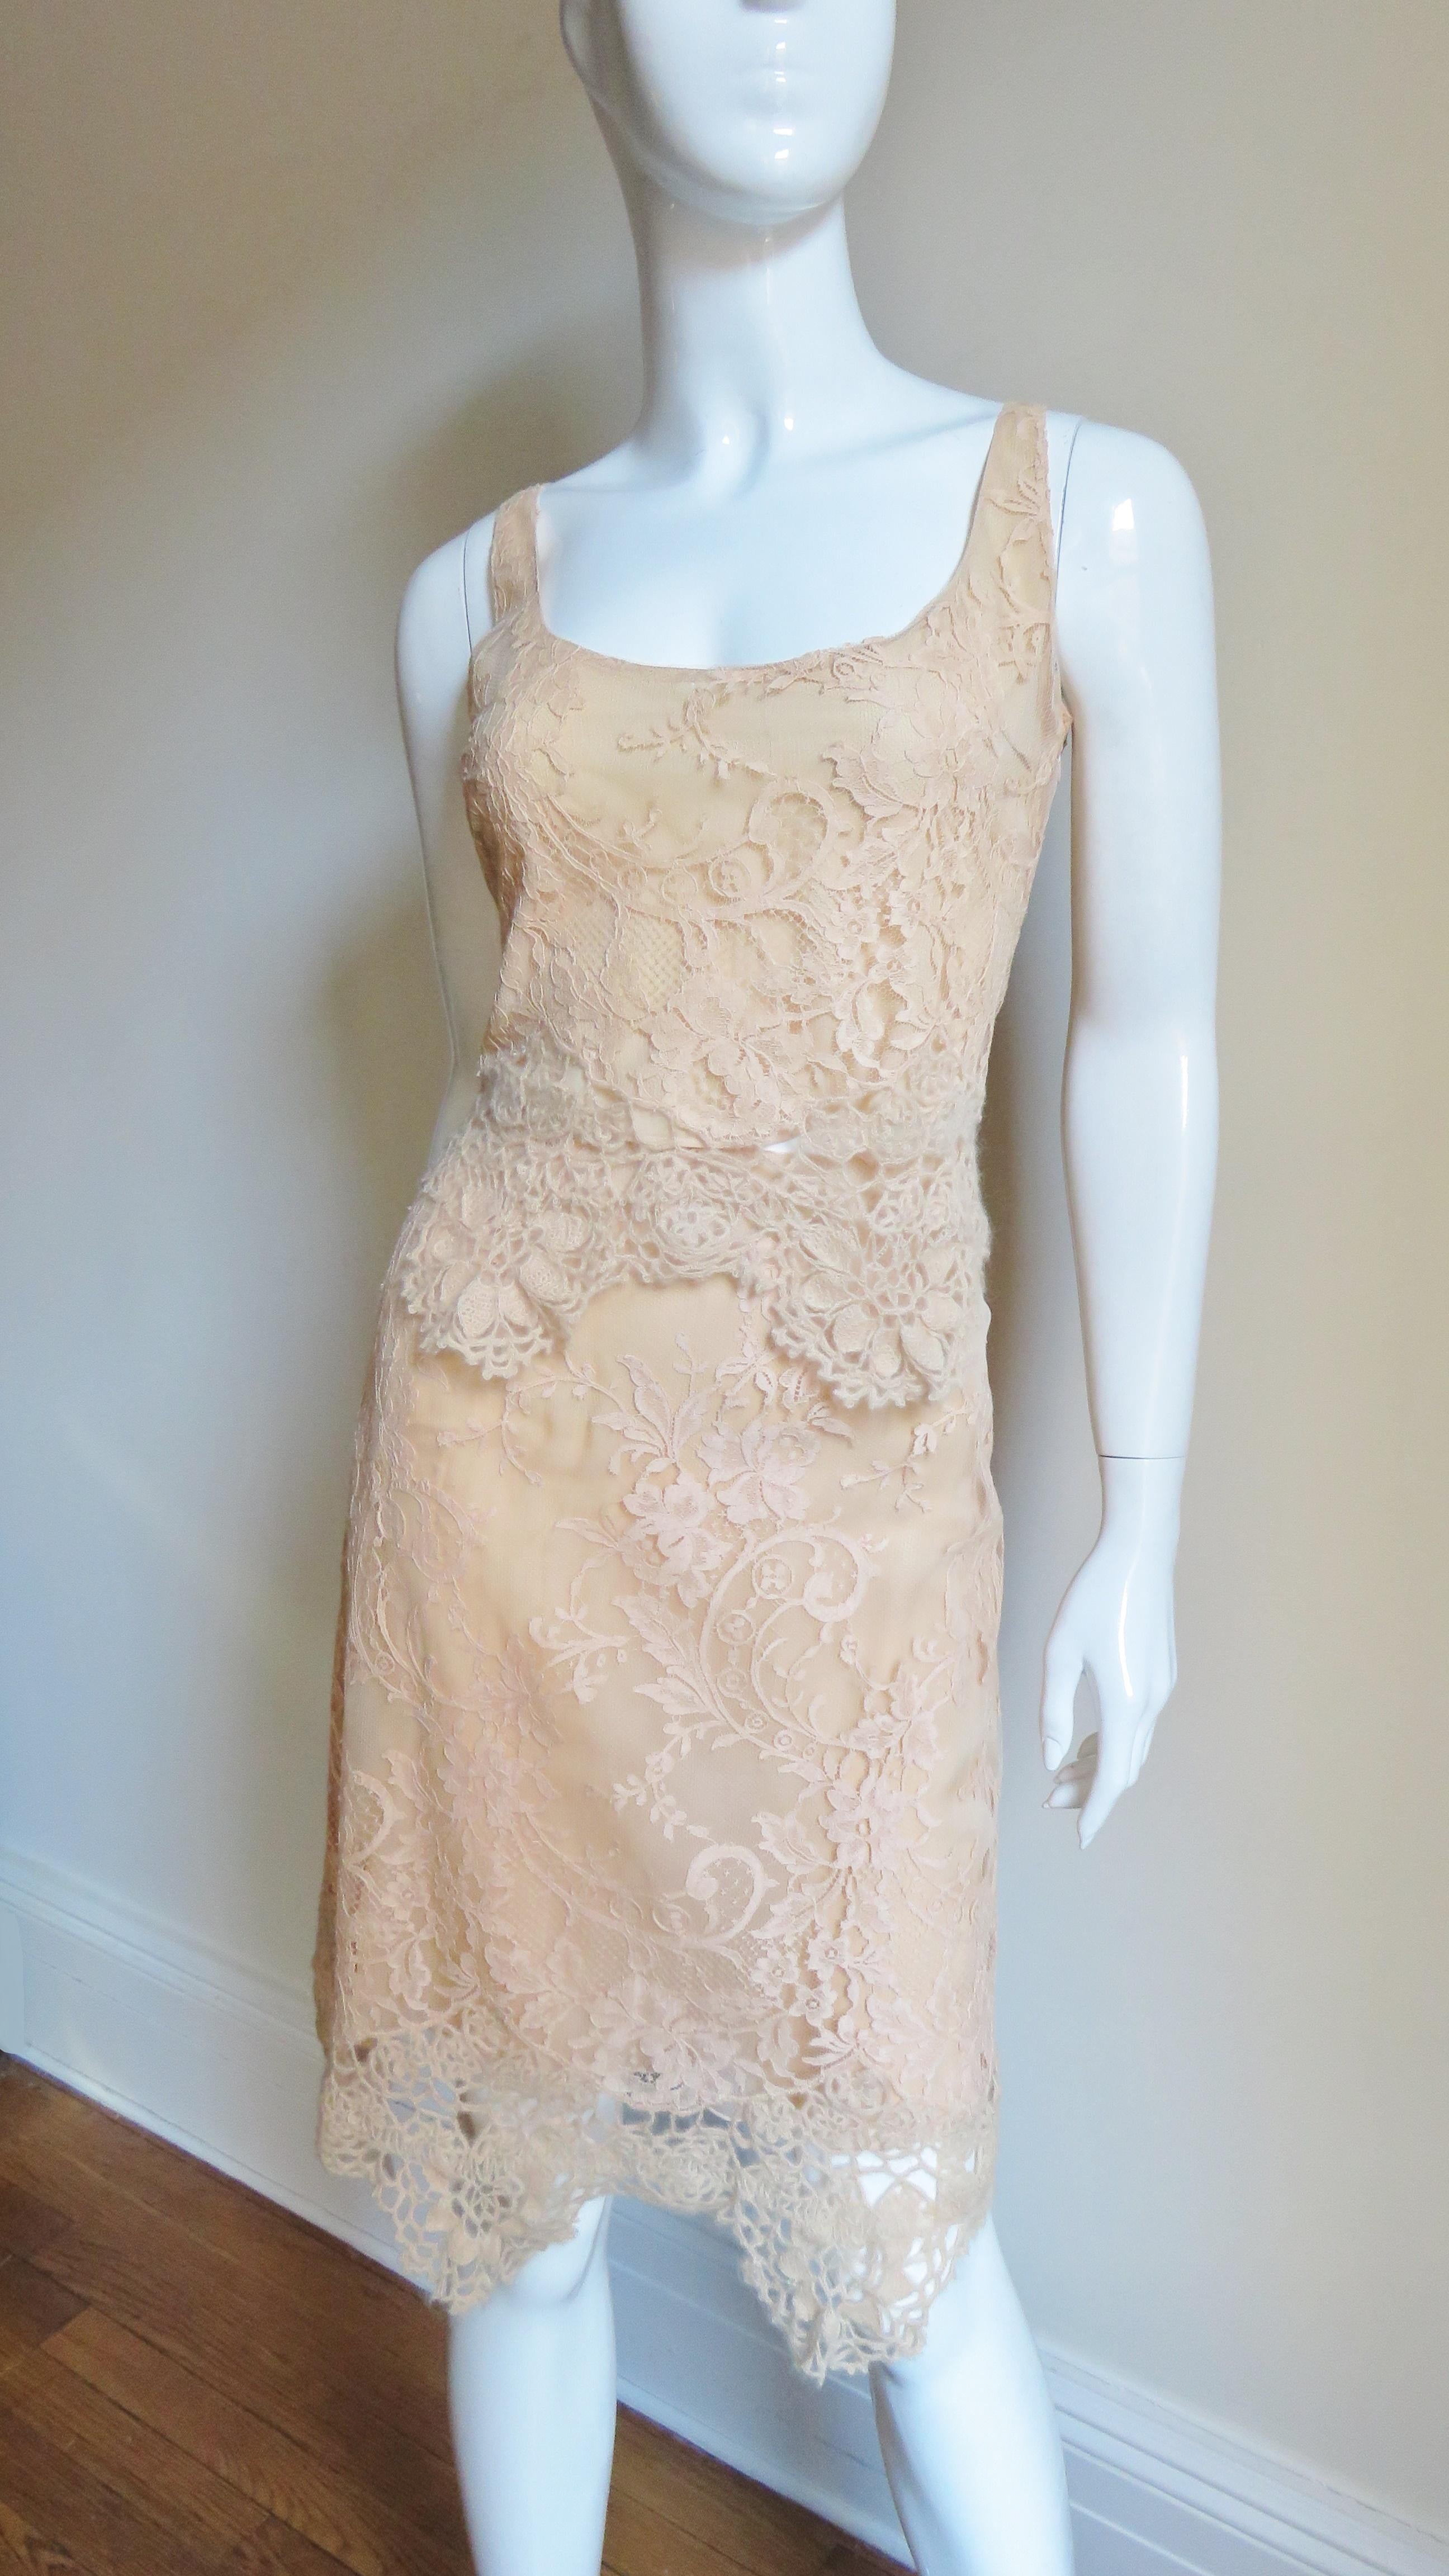  Valentino Silk Lace Skirt and Top In Excellent Condition For Sale In Water Mill, NY